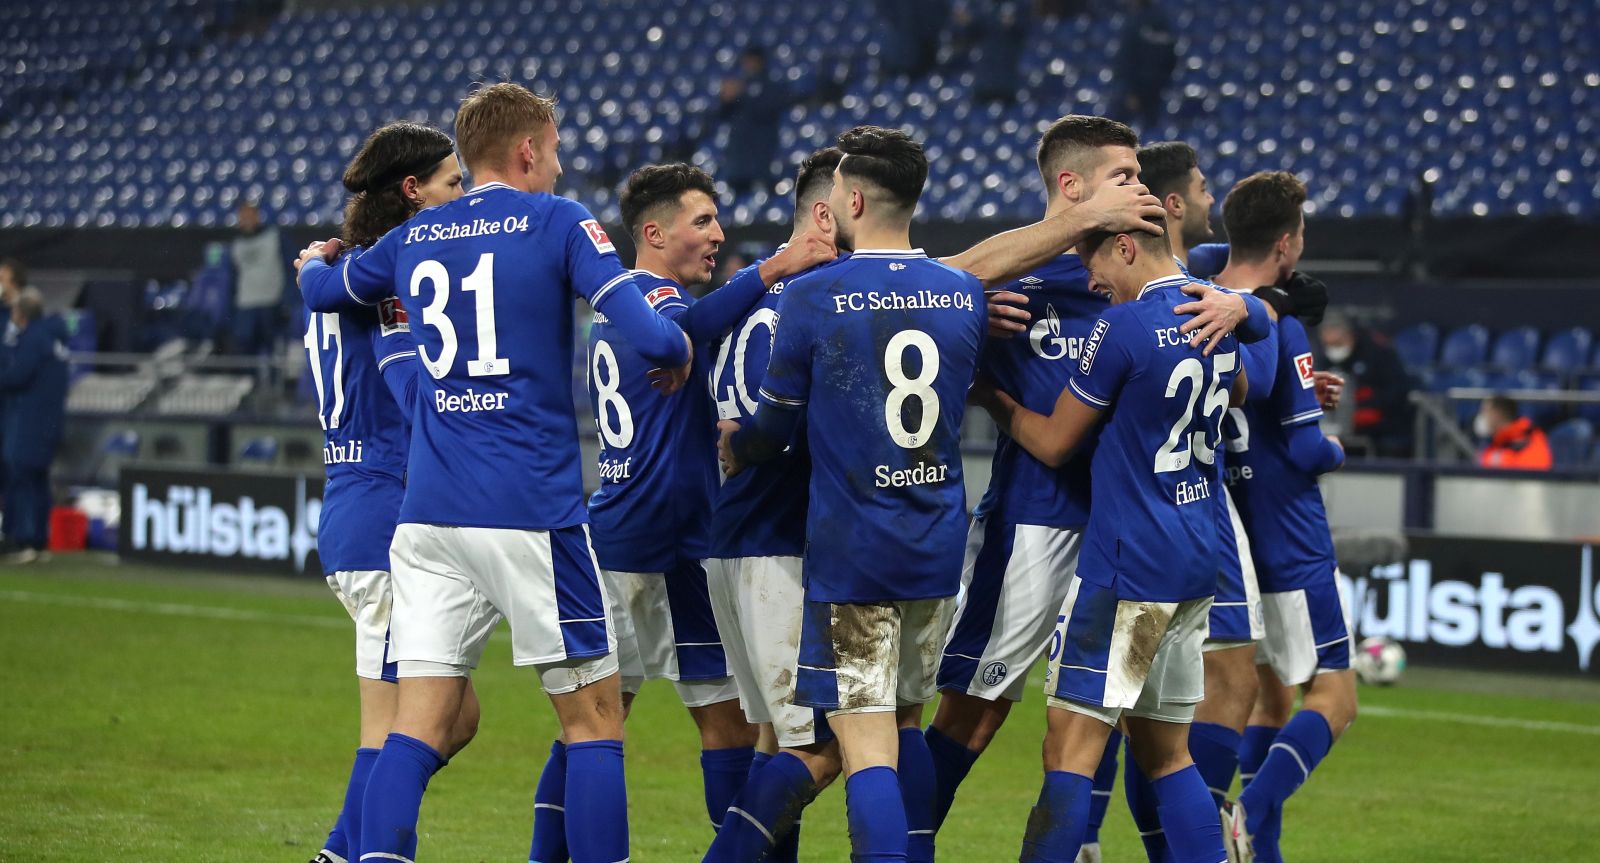 epa08928691 Matthew Hoppe (3-R) of FC Schalke 04 celebrates with teammates after scoring their team's third goal  during the Bundesliga match between FC Schalke 04 and TSG Hoffenheim at Veltins-Arena in Gelsenkirchen, Germany, 09 January 2021.  EPA/LARS BARON / POOL DFL regulations prohibit any use of photographs as image sequences and/or quasi-video.